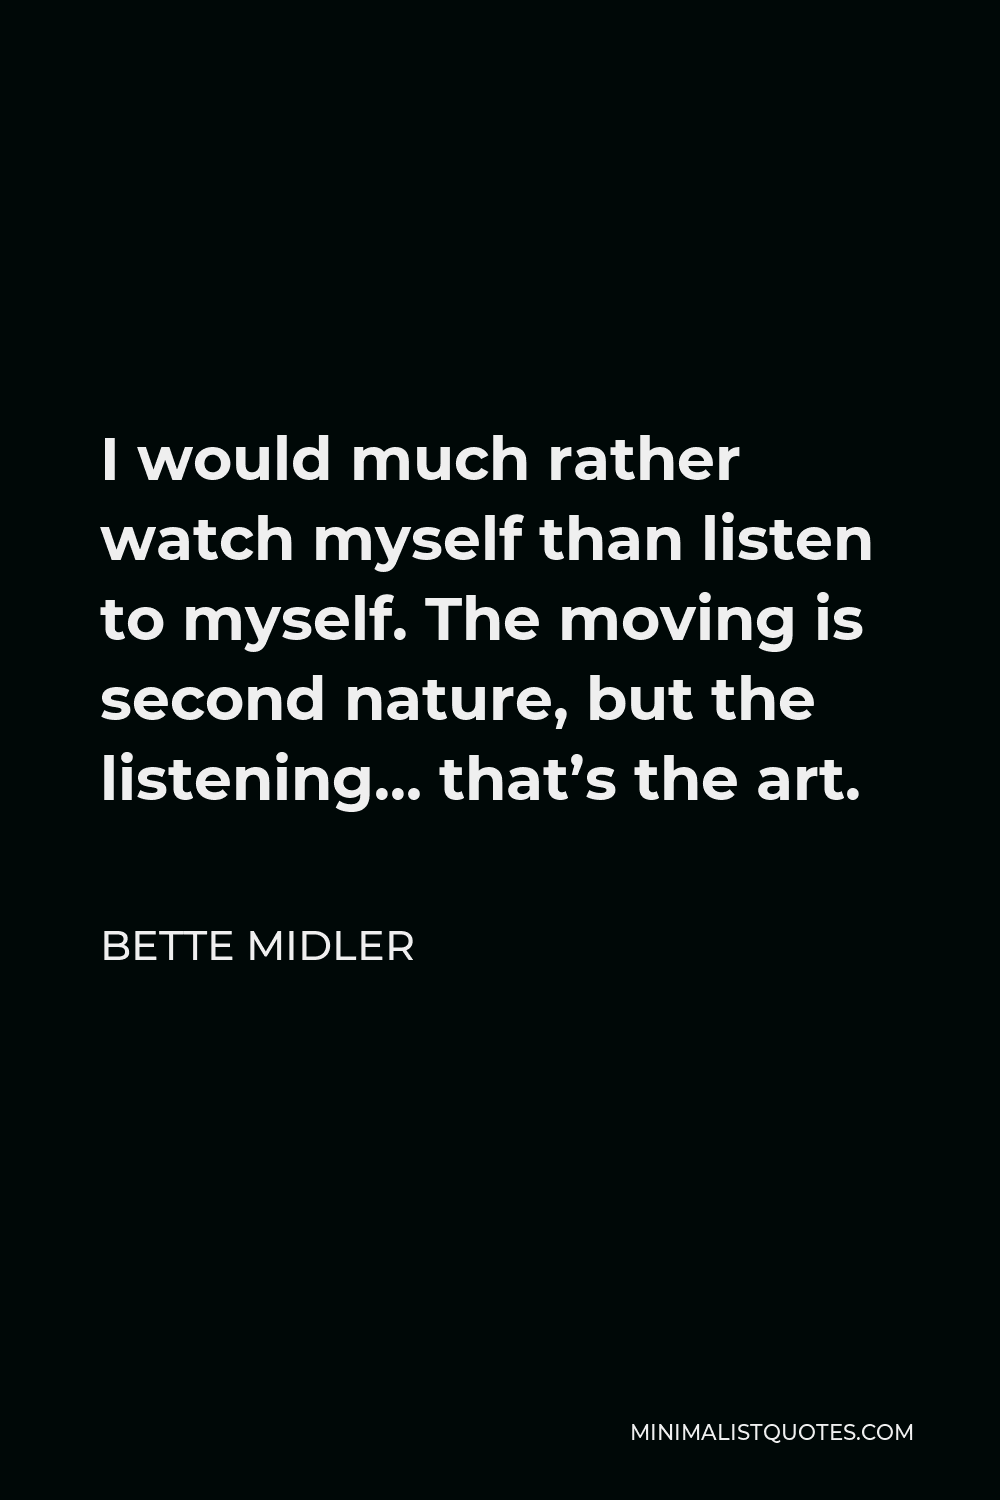 Bette Midler Quote - I would much rather watch myself than listen to myself. The moving is second nature, but the listening… that’s the art.